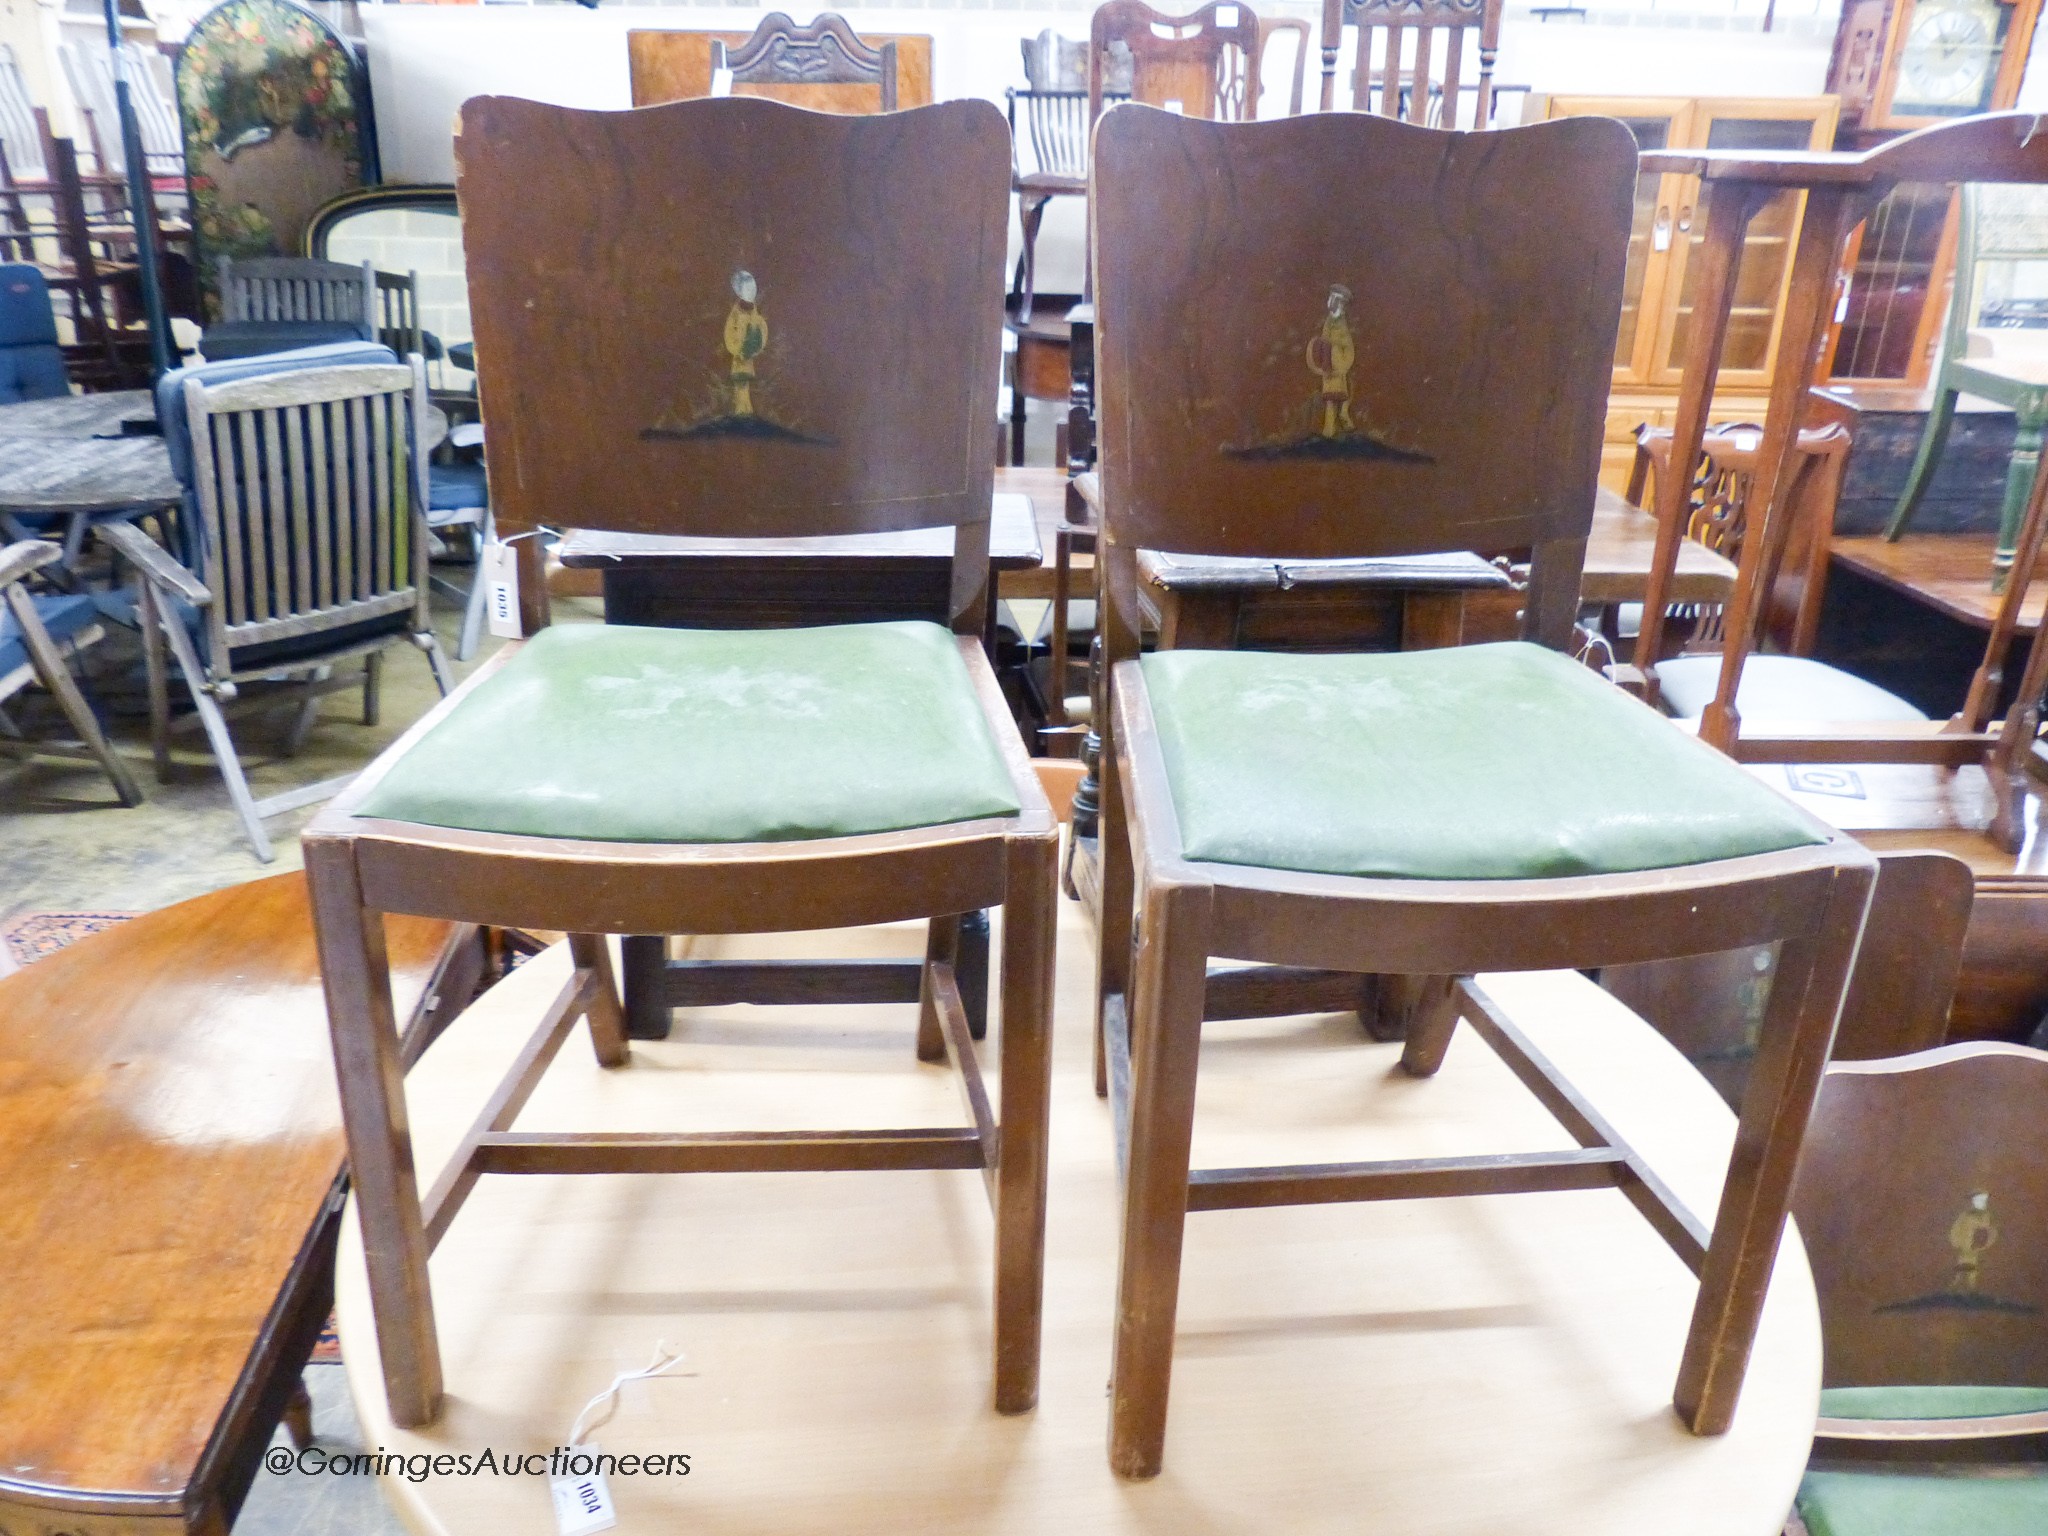 A set of four 1920's chinoiserie lacquer dining chairs